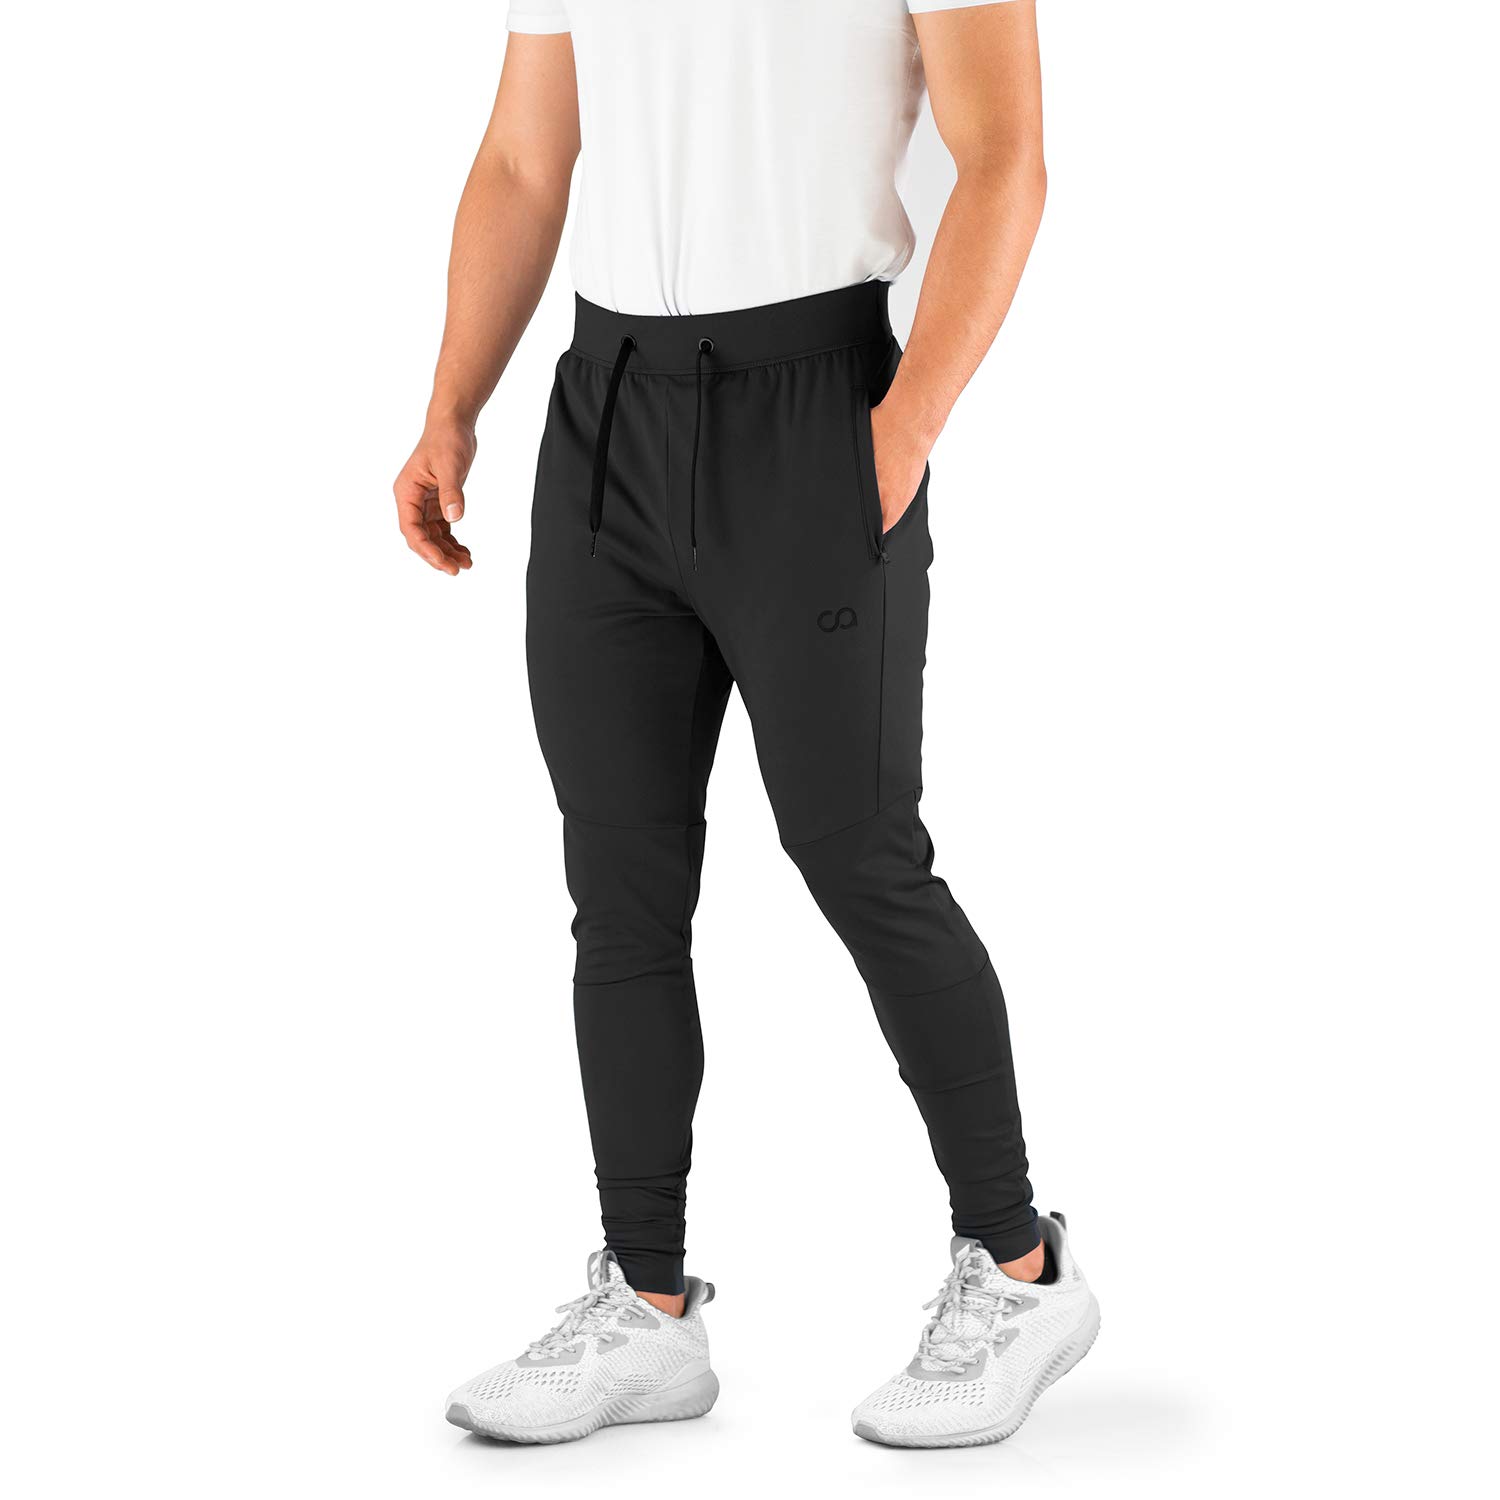 Pee pee sports 4 Way Lycra Regular Fit Running Track Pants for Men Lower  Trouser Sports Lower with Side Pockets for Daily Use Gym Wear for Men